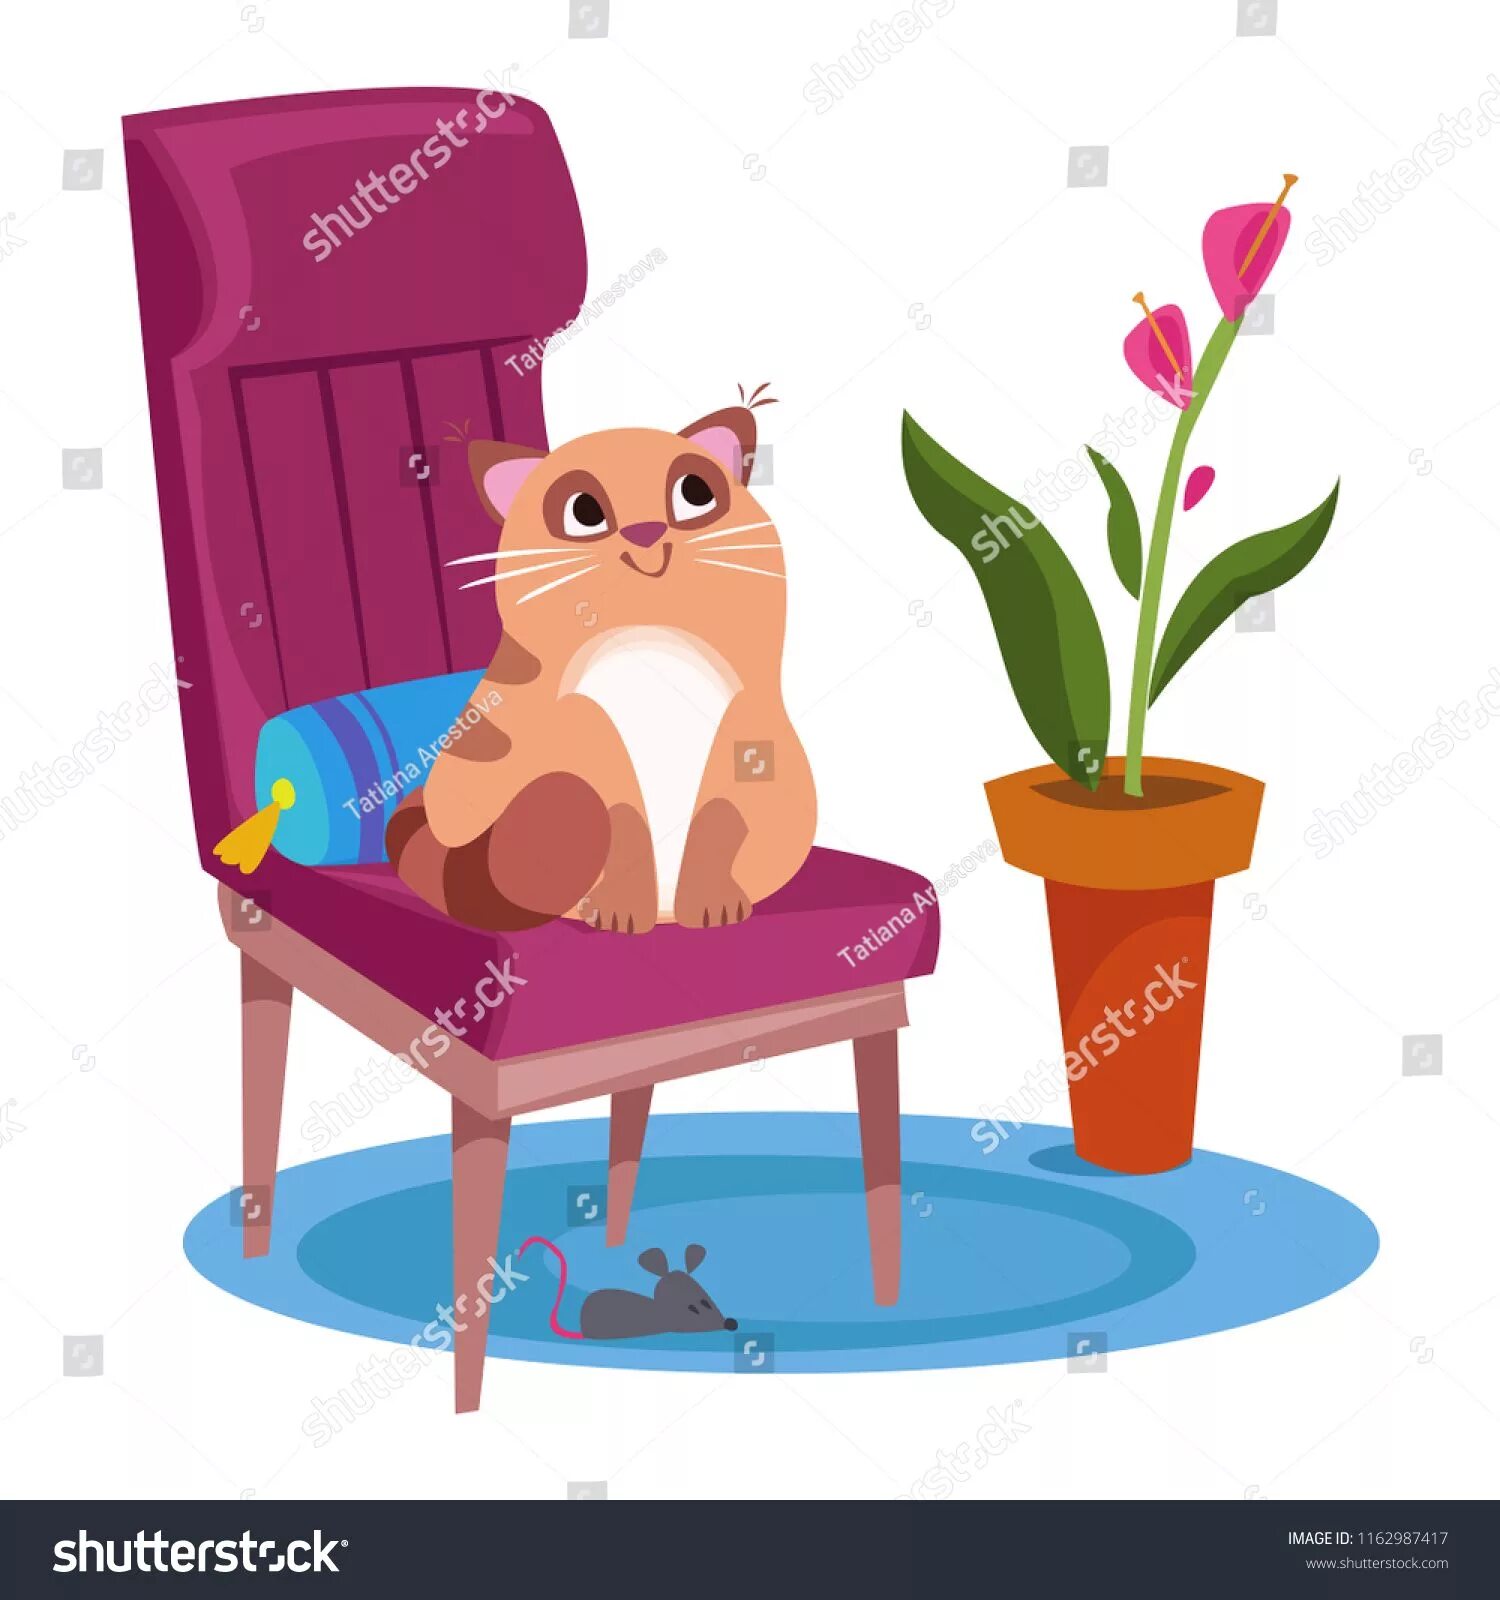 Cat under the Chair. Картинка Cat on the Chair картинки. The Cat is on the Chair the Mouse under the. Cat is in the Chair. The cat is the chair